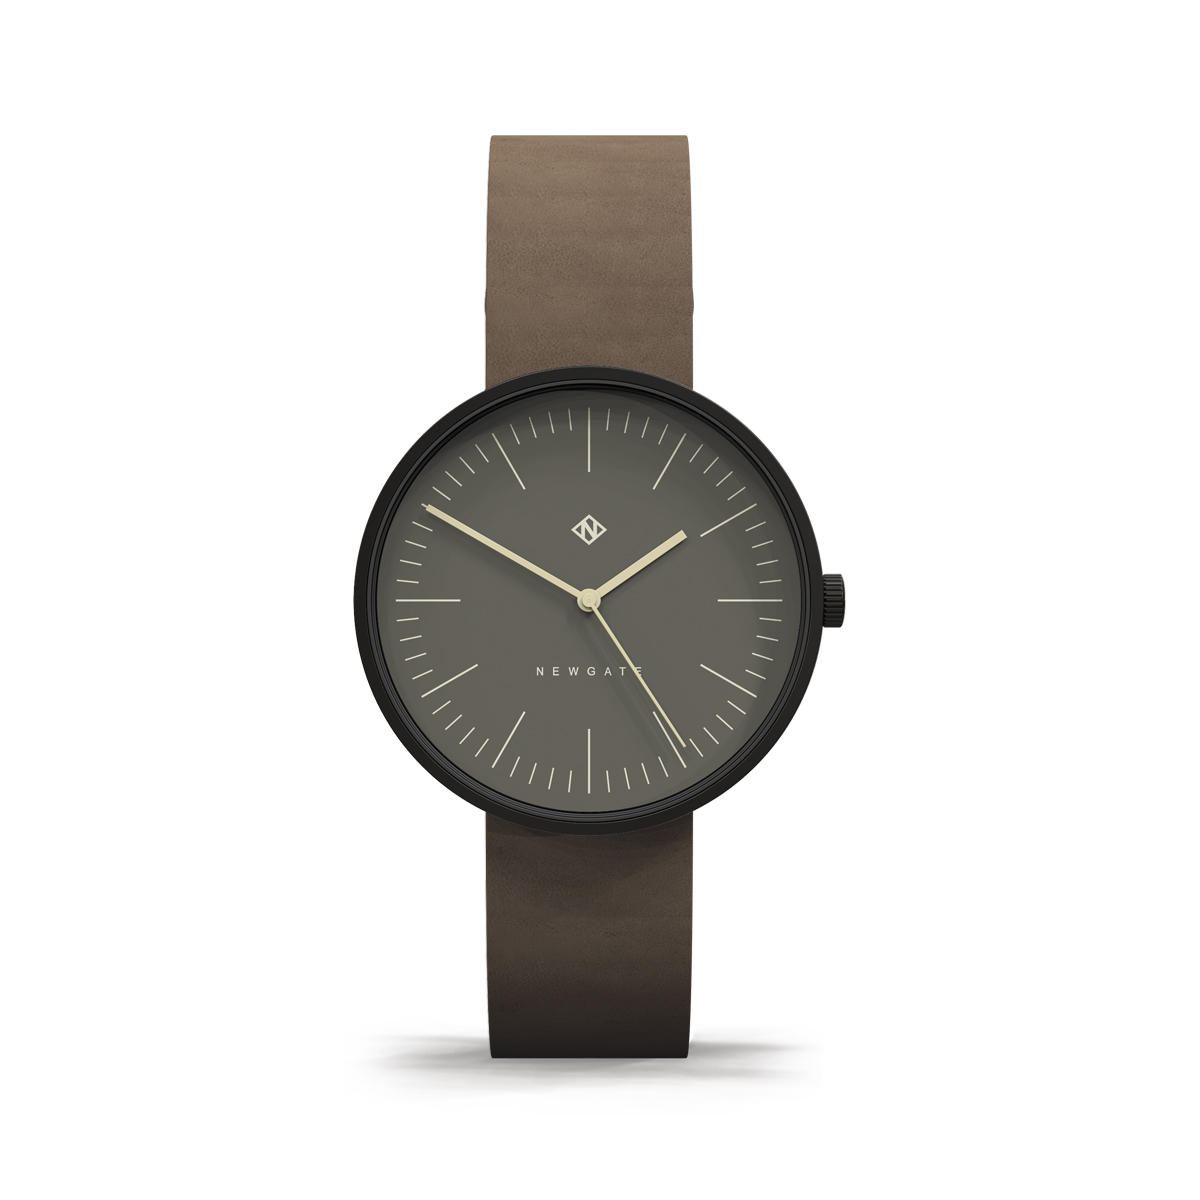 Newgate watches new launch at baselworld 2018 drumline in black with grey marker dial and brown nubuck leather strap 1